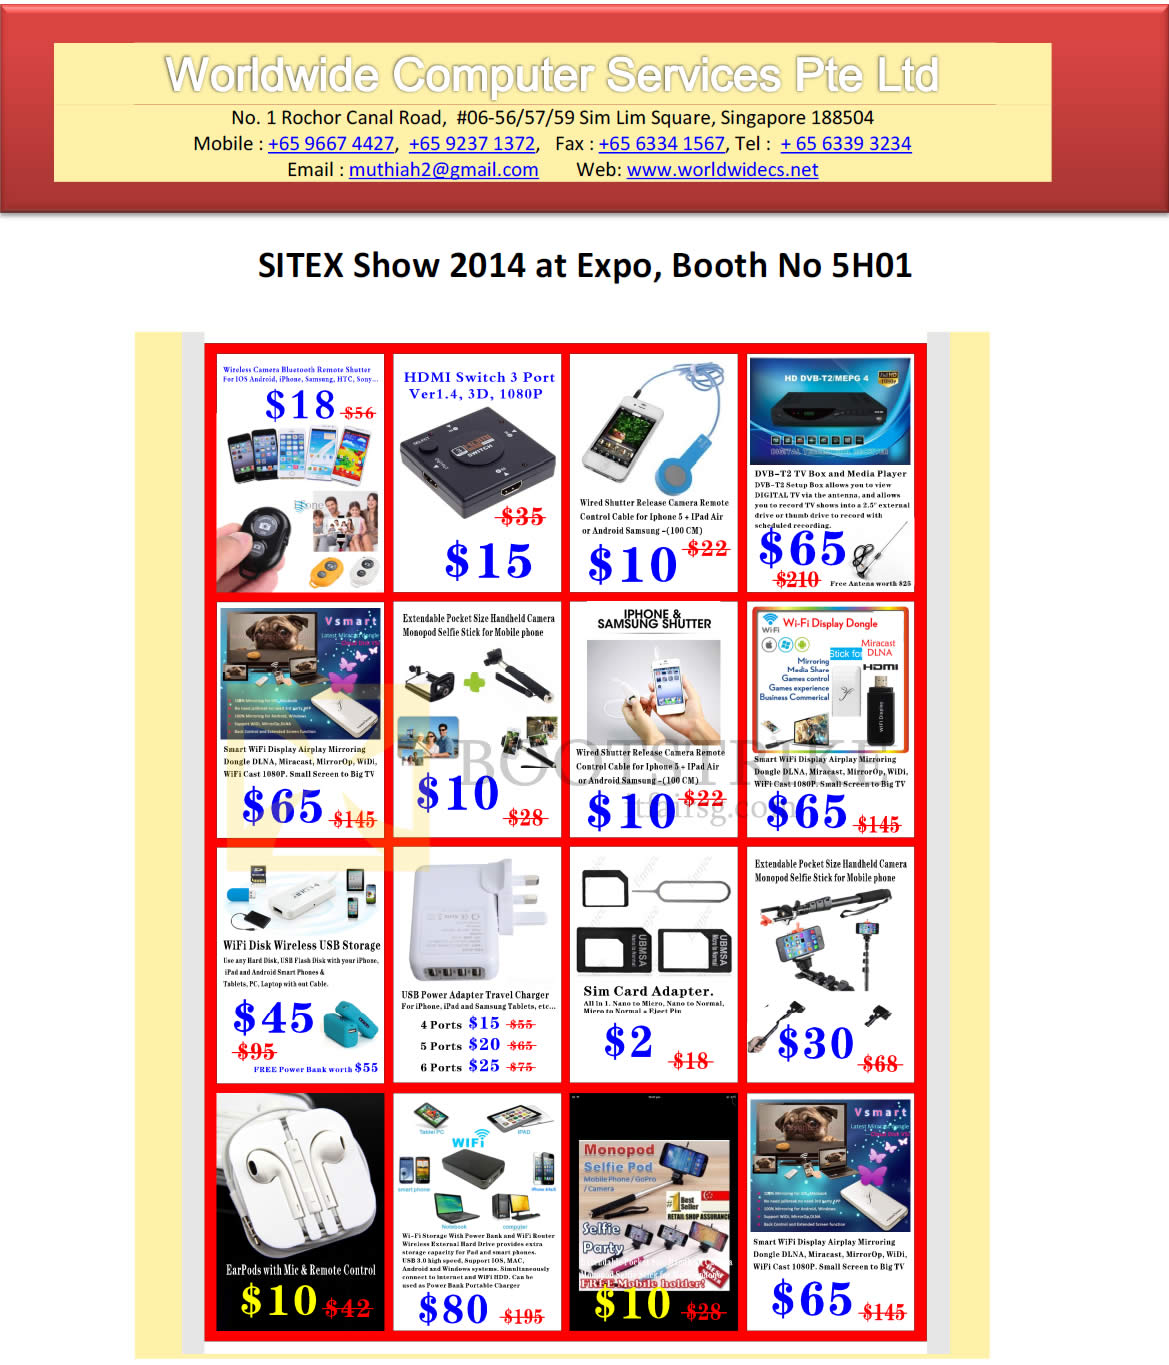 SITEX 2014 price list image brochure of Worldwide Computer Services Accessories, Sim Card Adapter, Power Adapter Travel Charger, Wireless USB Storage, Handheld Camera, Wi-fi Display Dongle